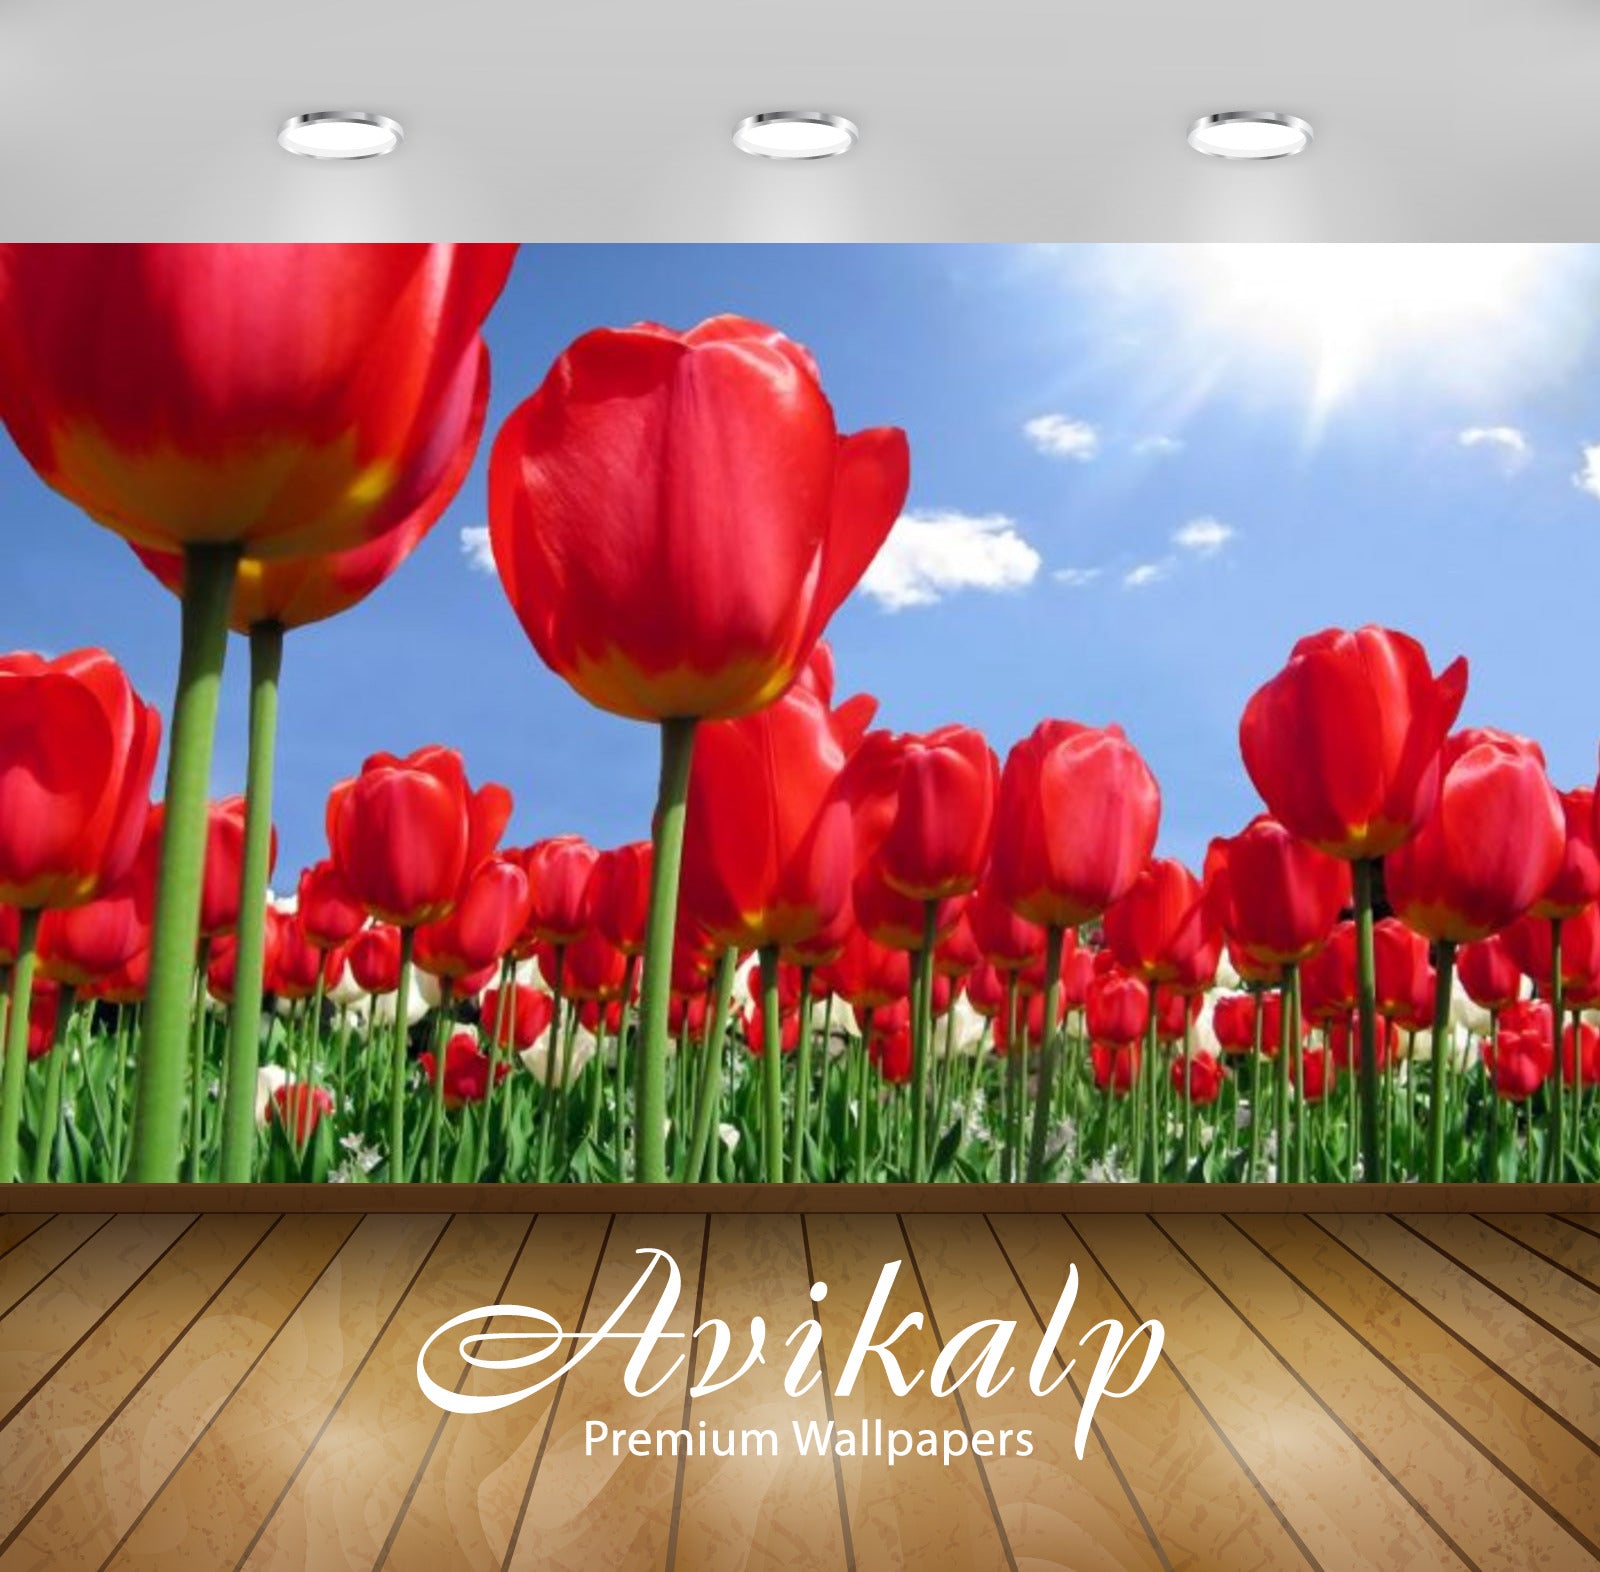 Avikalp Exclusive Awi2148 Spring Flowers Field With Red Tulips And Blue Sky Sunlight  Full HD Wallpa